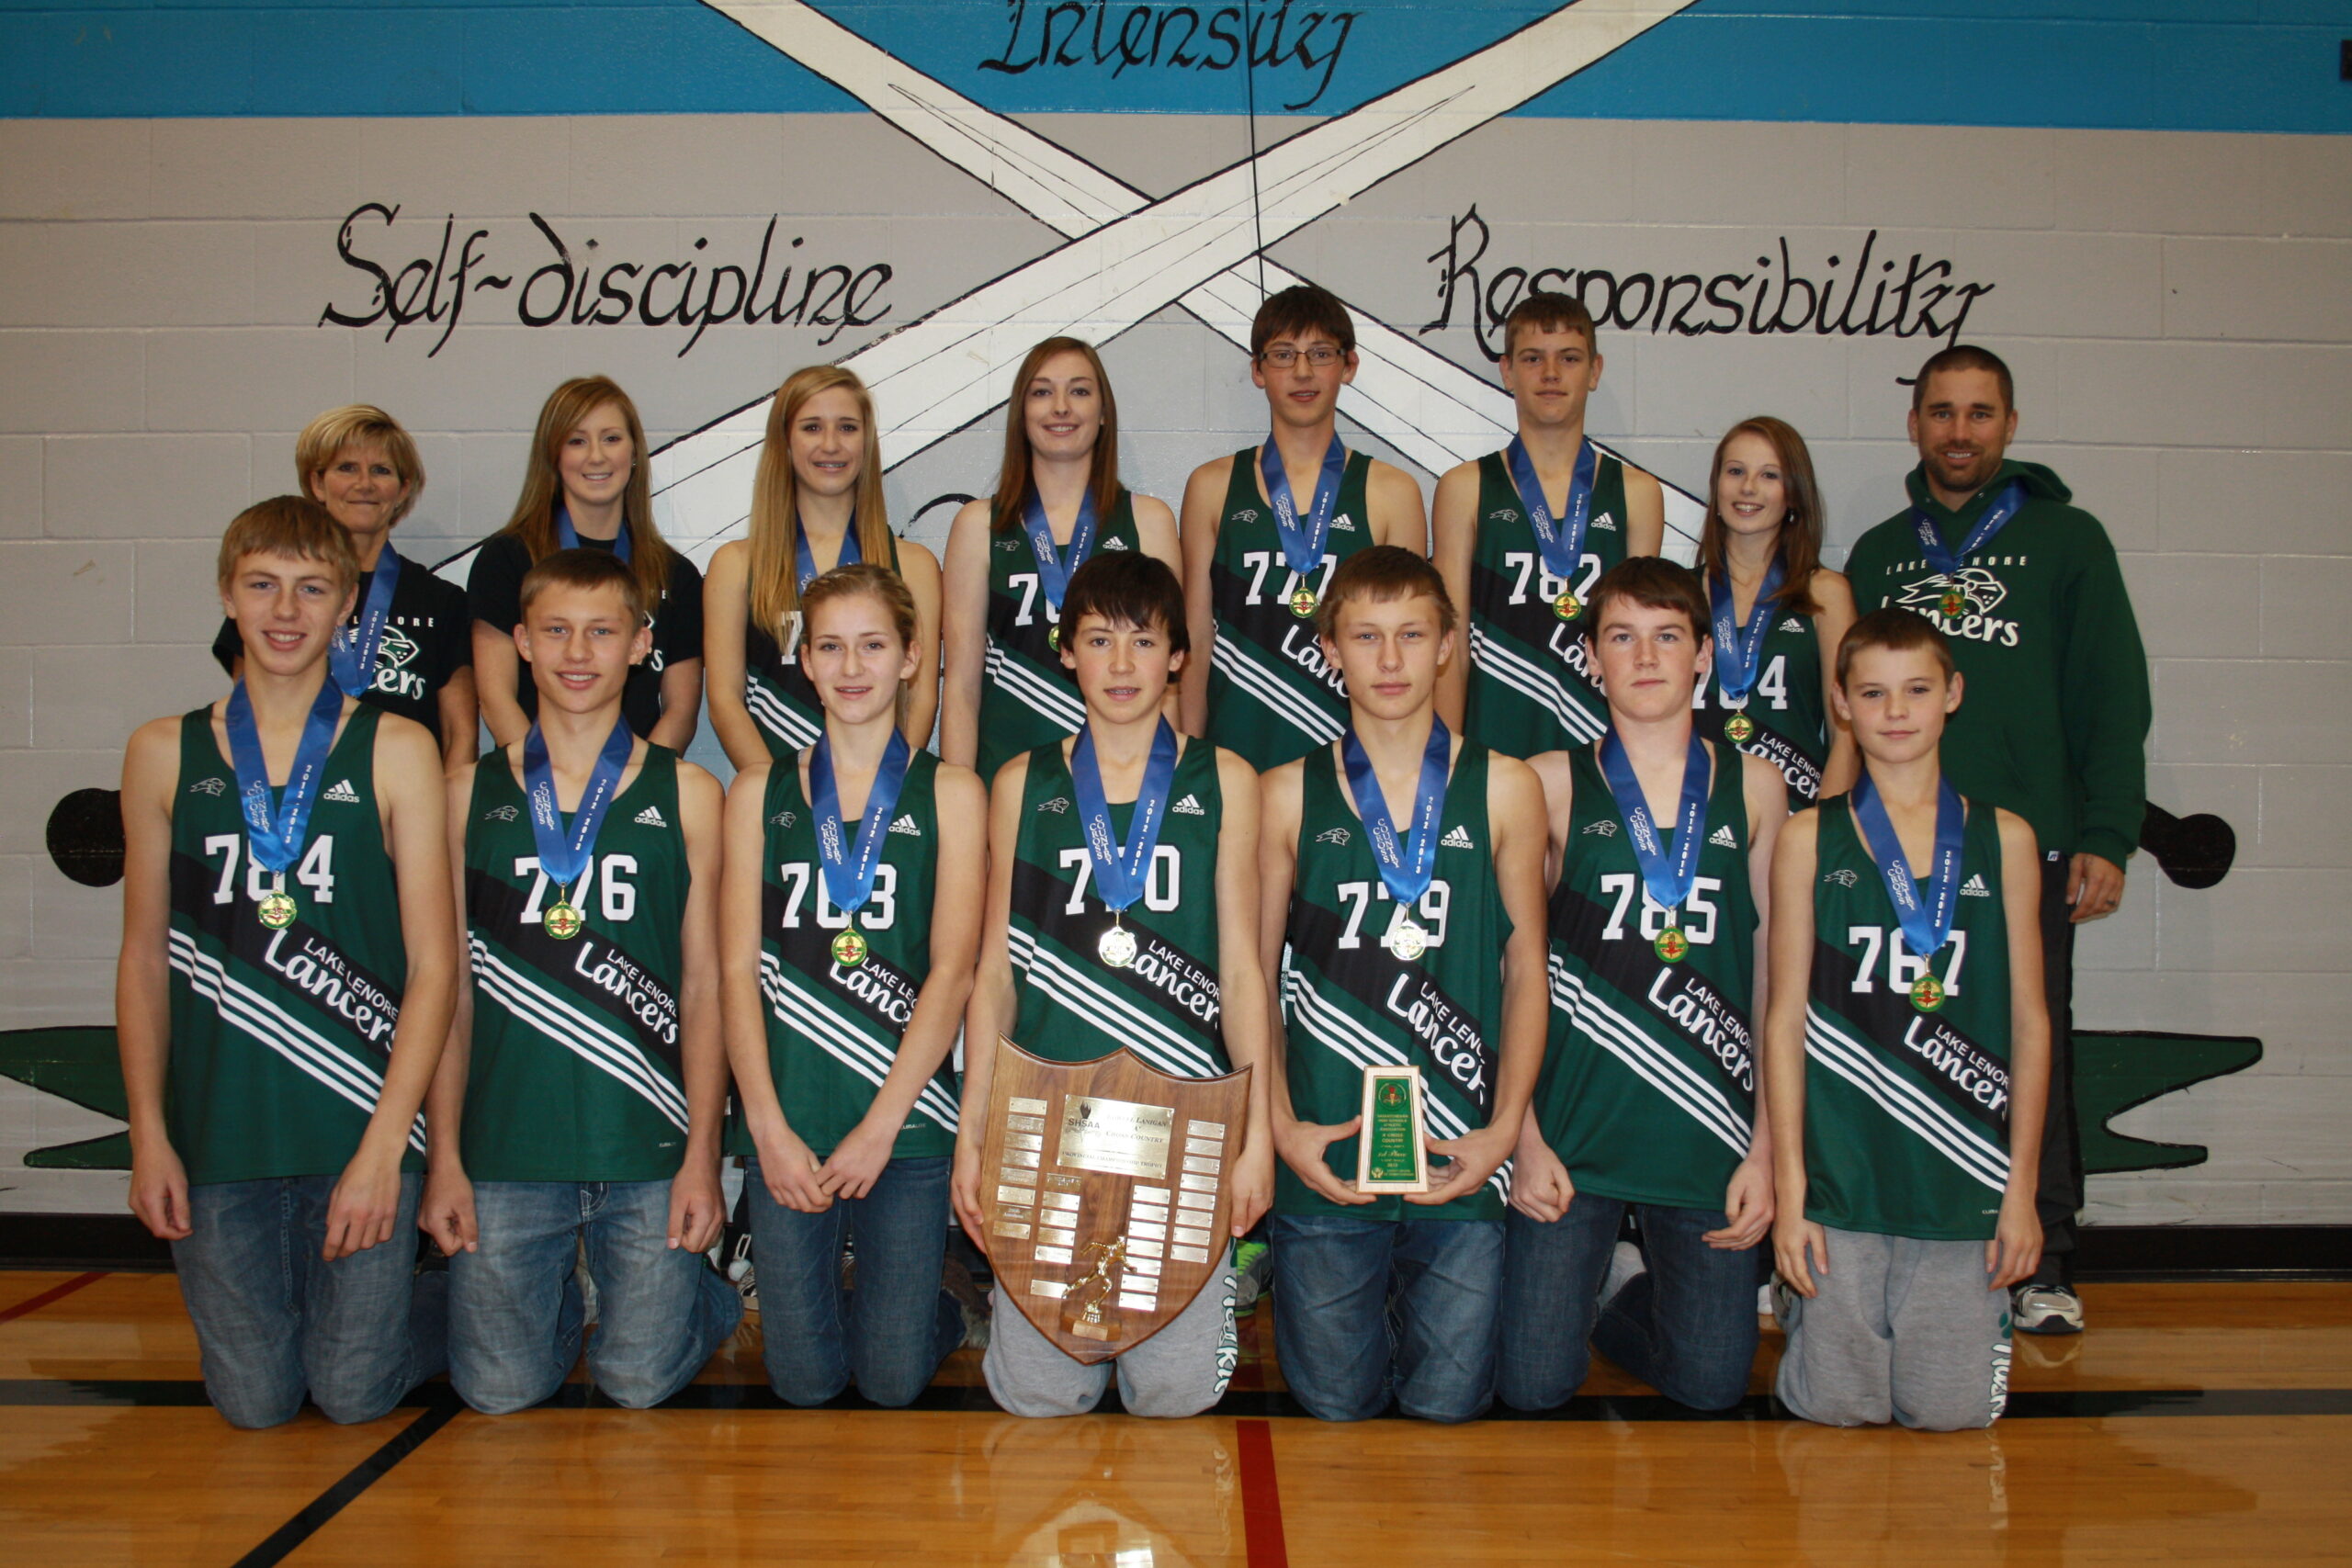 Lake Lenore School's 2012 provincial cross country contingent.